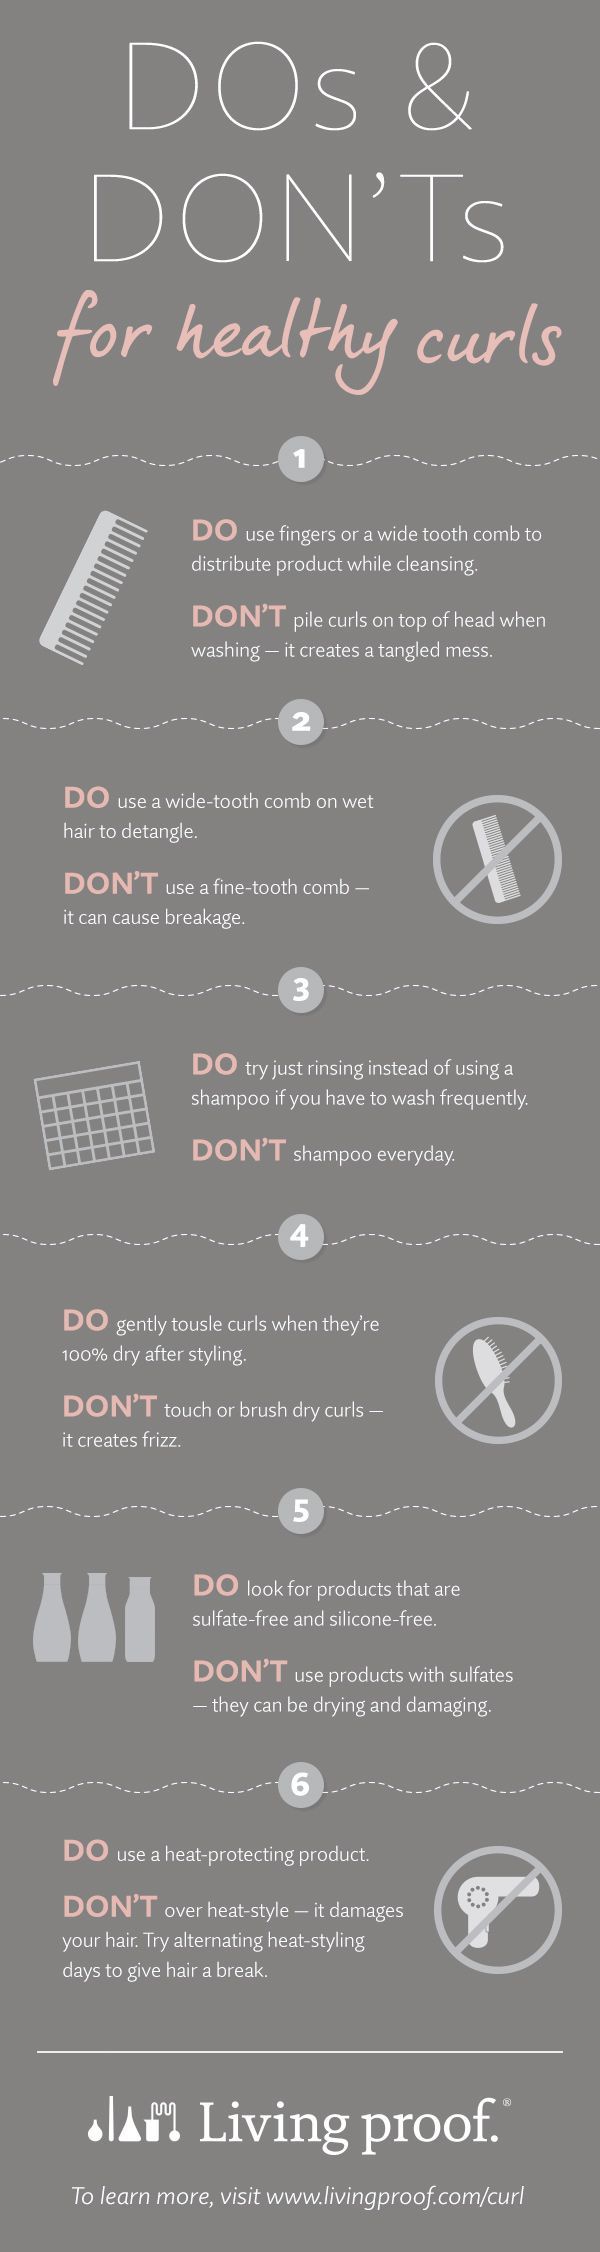 Got naturally curly hair? Here are the do’s and don’ts for keeping your curls healthy and gorgeous.